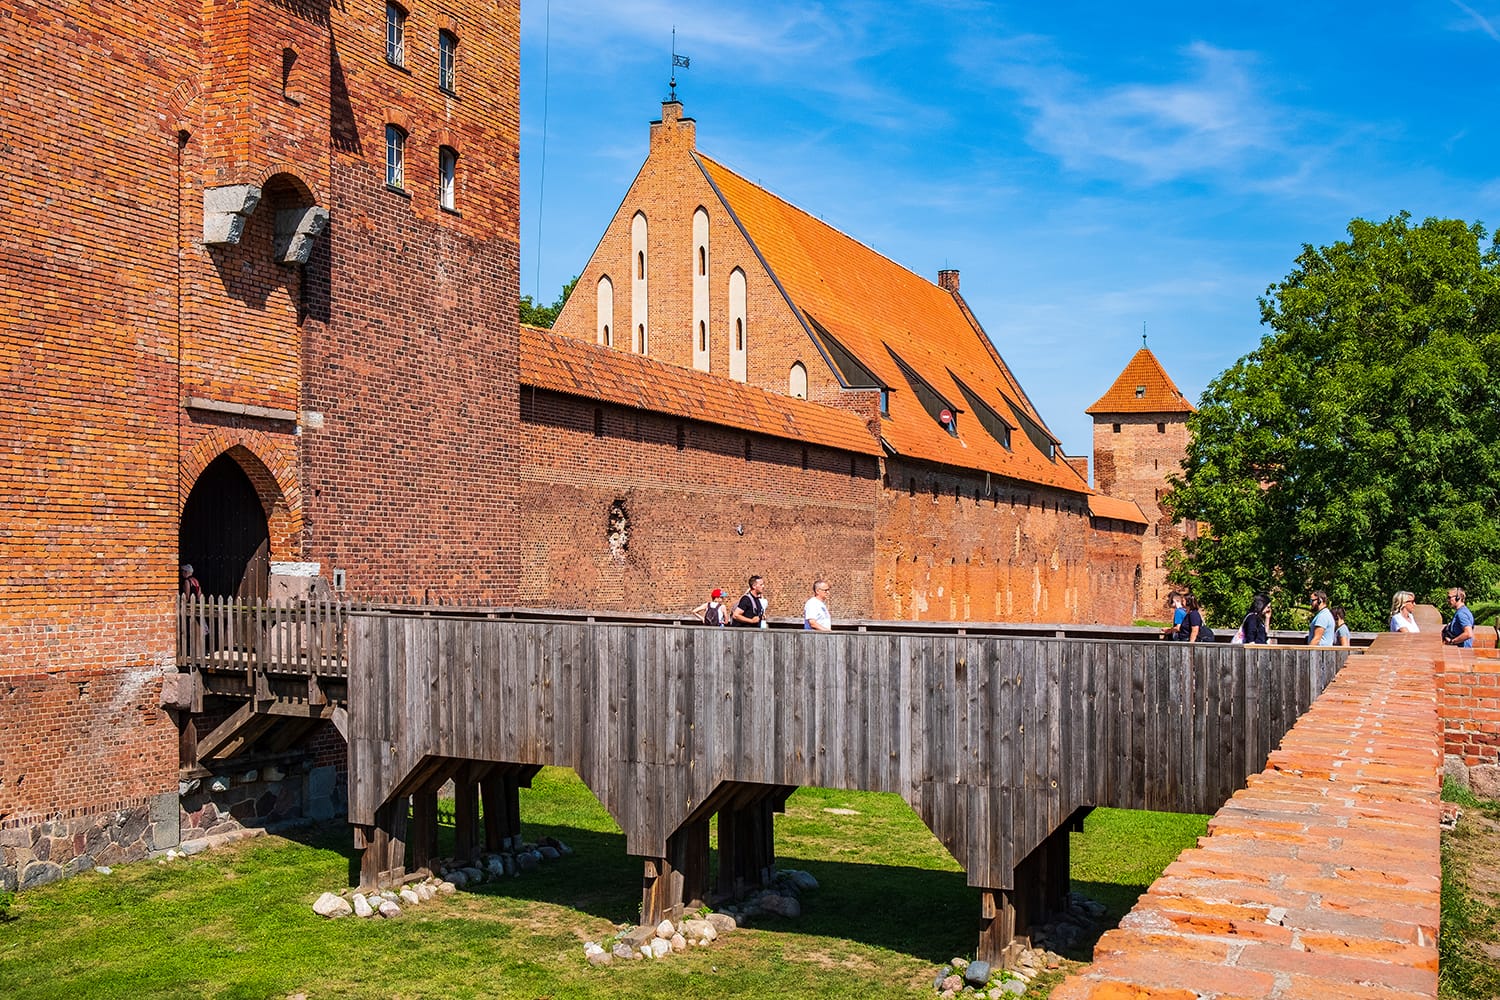 Panoramic view of the medieval Teutonic Order Castle in Malbork, Poland - external defense walls with main gate tower and drawbridge over the moat